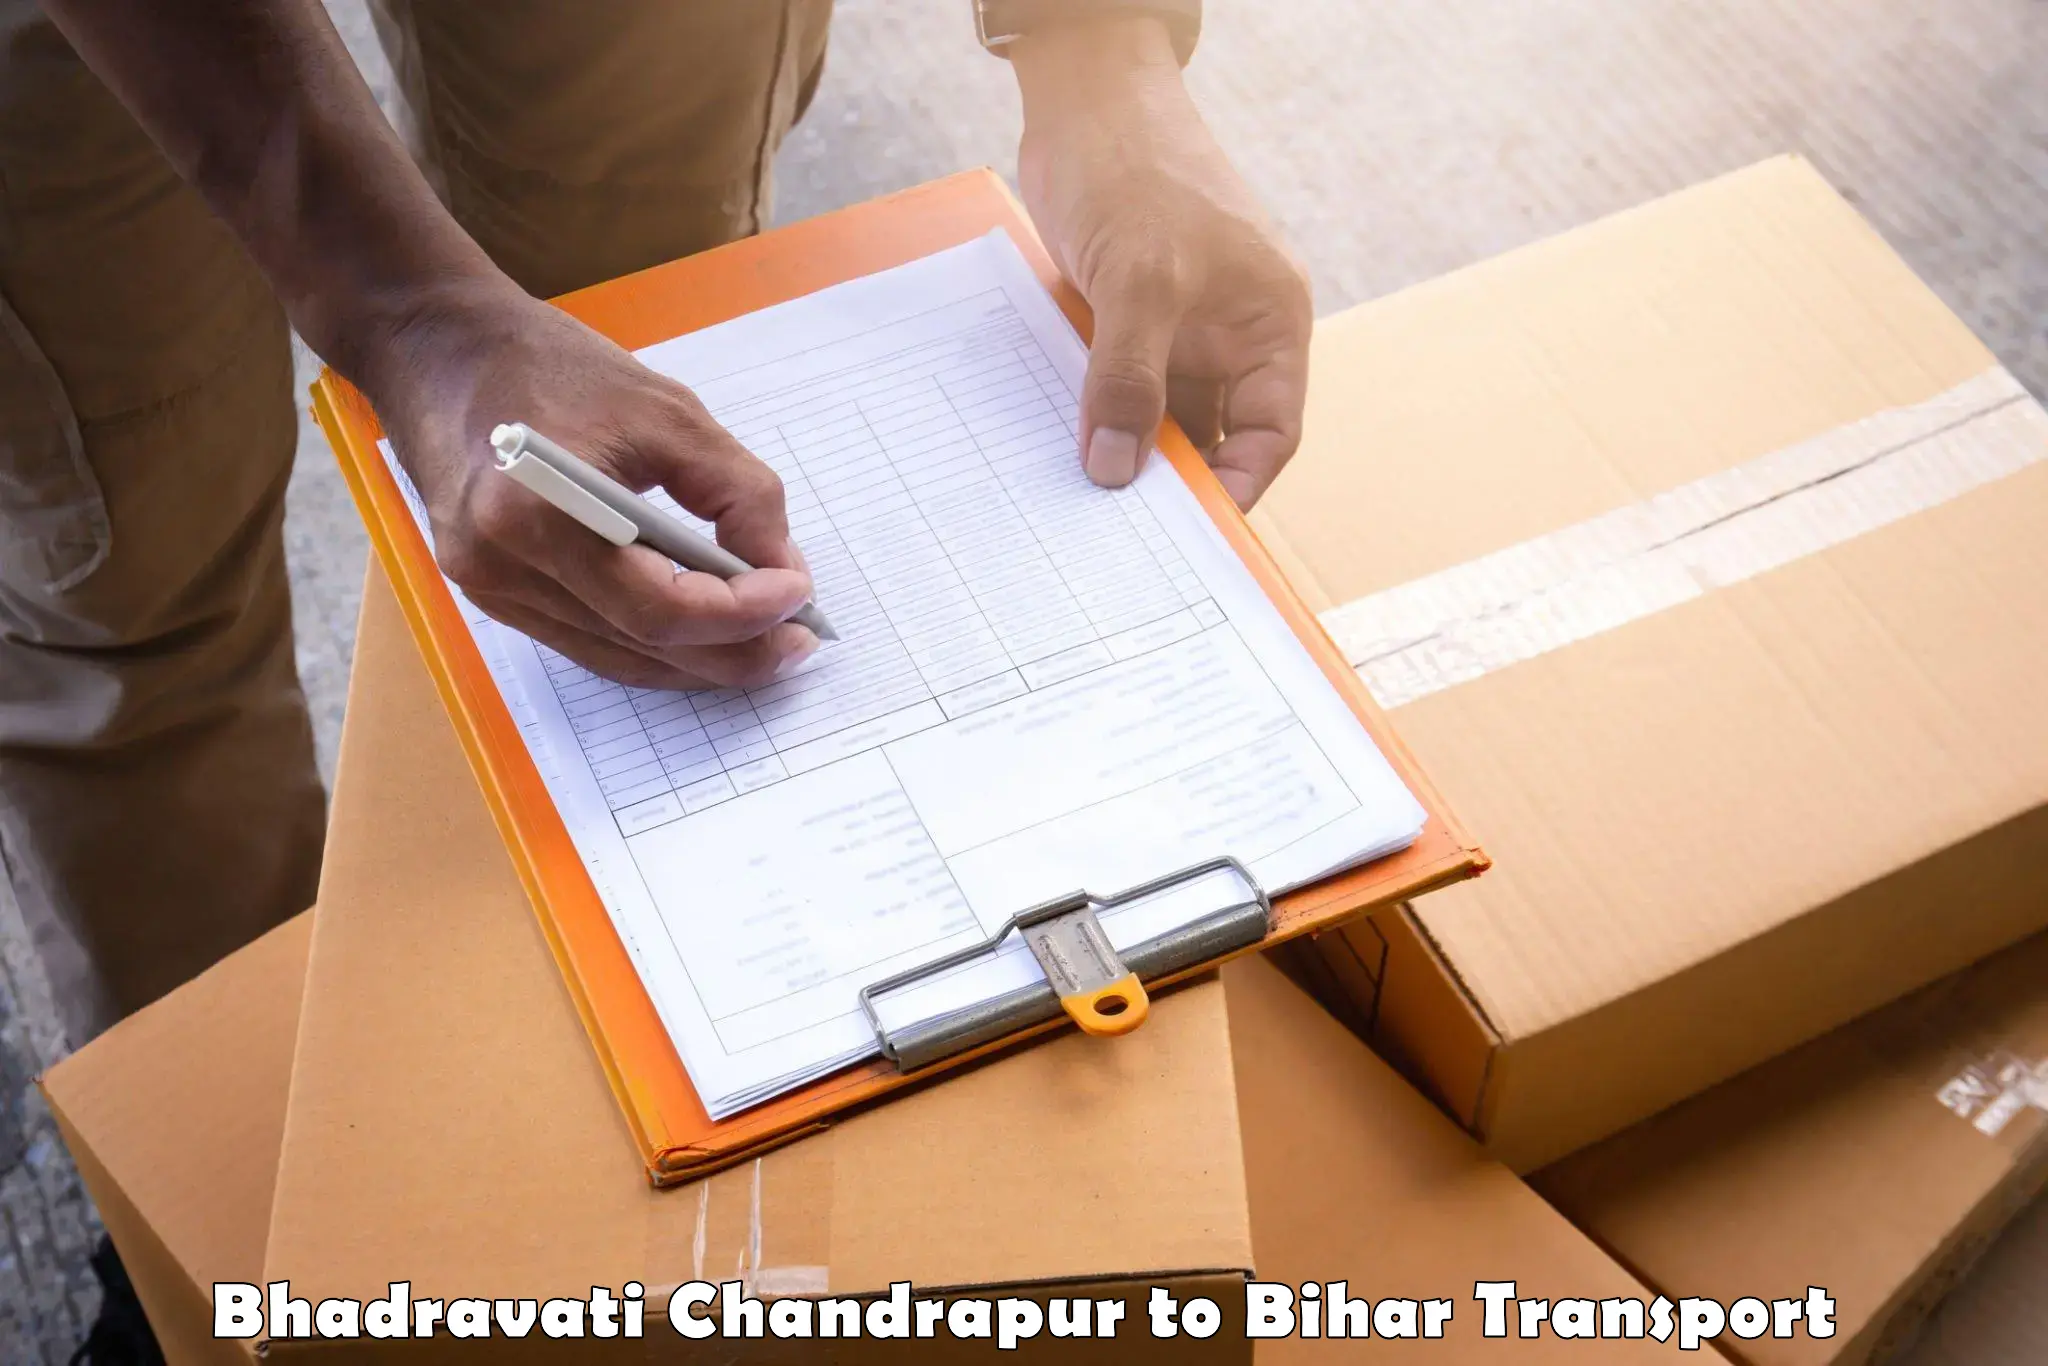 Package delivery services Bhadravati Chandrapur to Sonbarsa